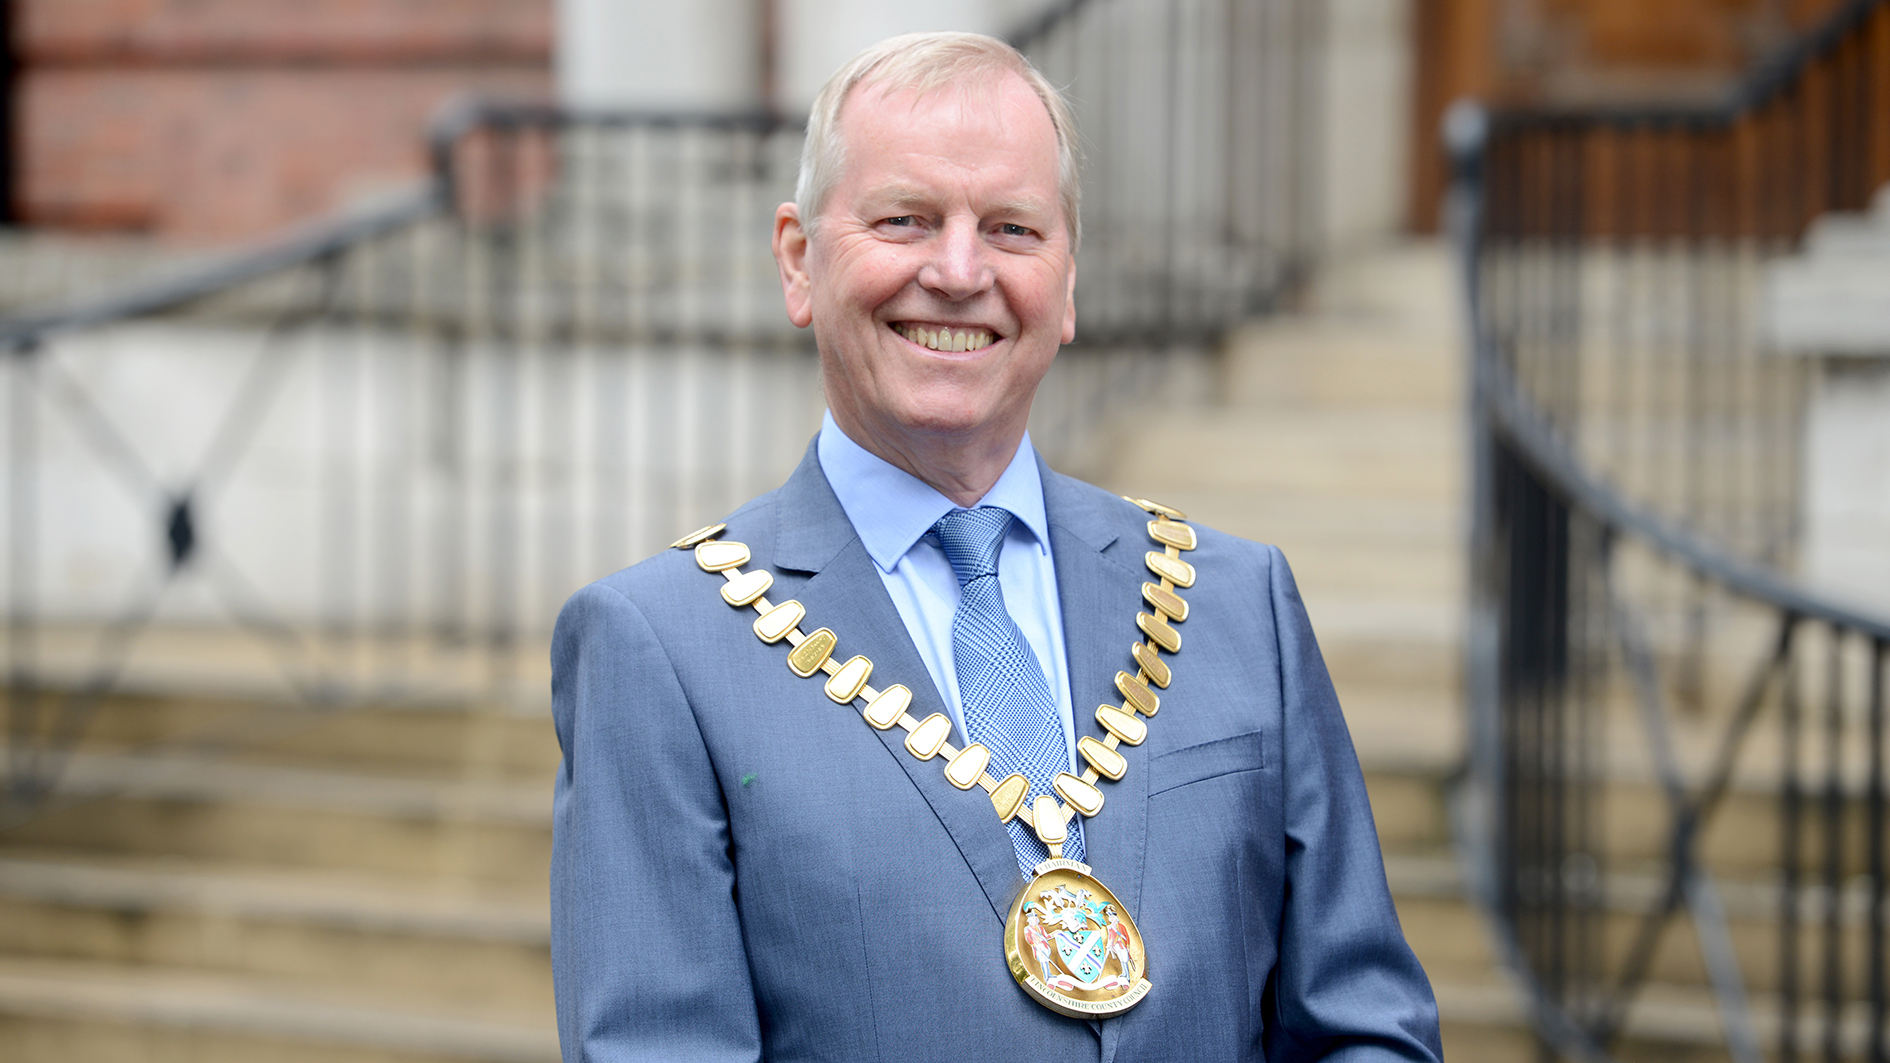 Cllr Michael Brookes, the new council chairman